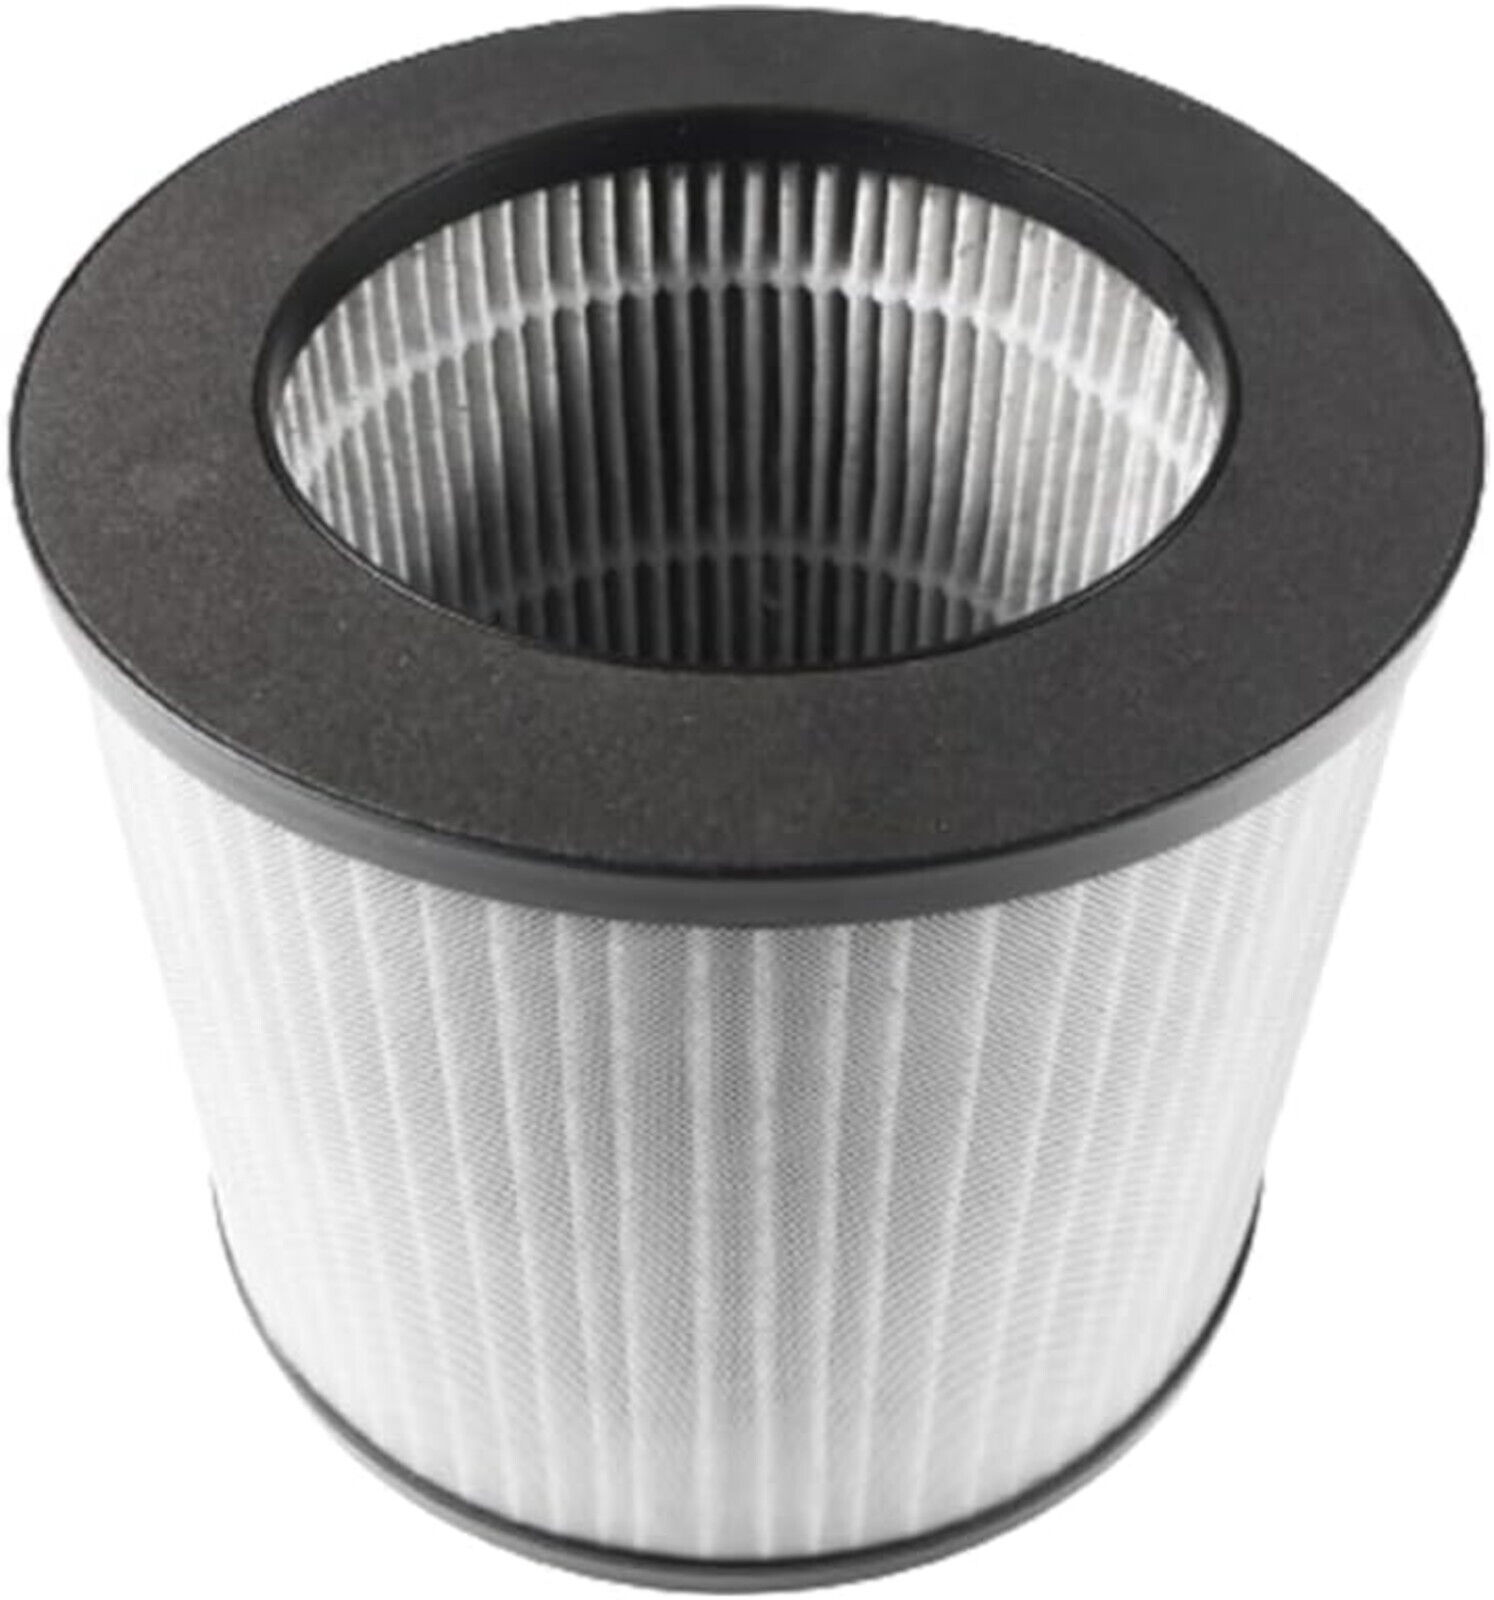 HQRP 2801 Replacement Filter for Bissell MyAir Personal 2780A 2780B 2780P 27809